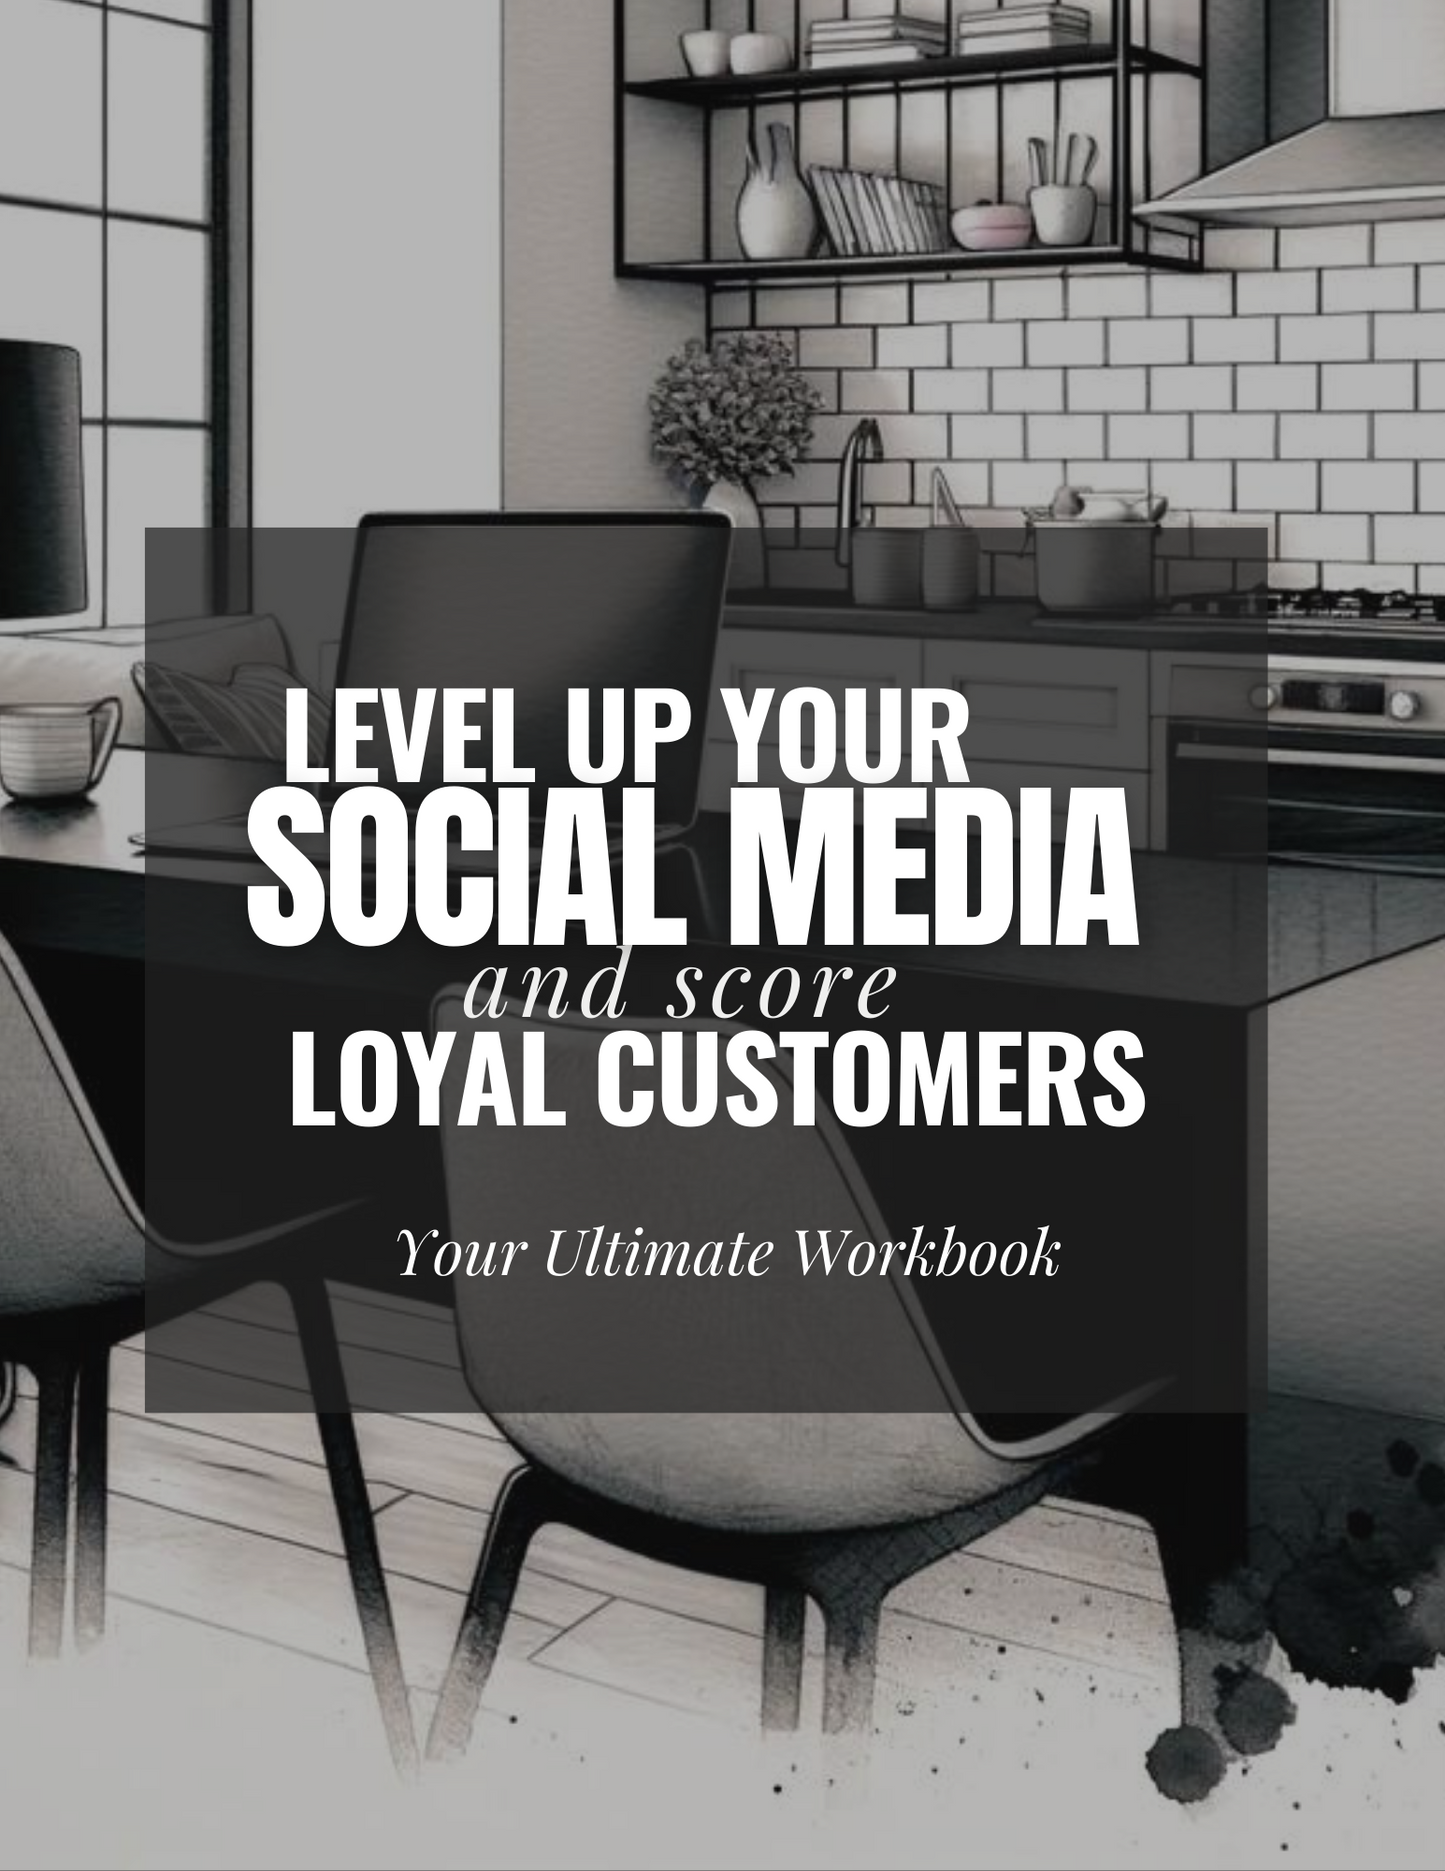 Level Up Your Social Media | Ultimate Handbook | 65 pages